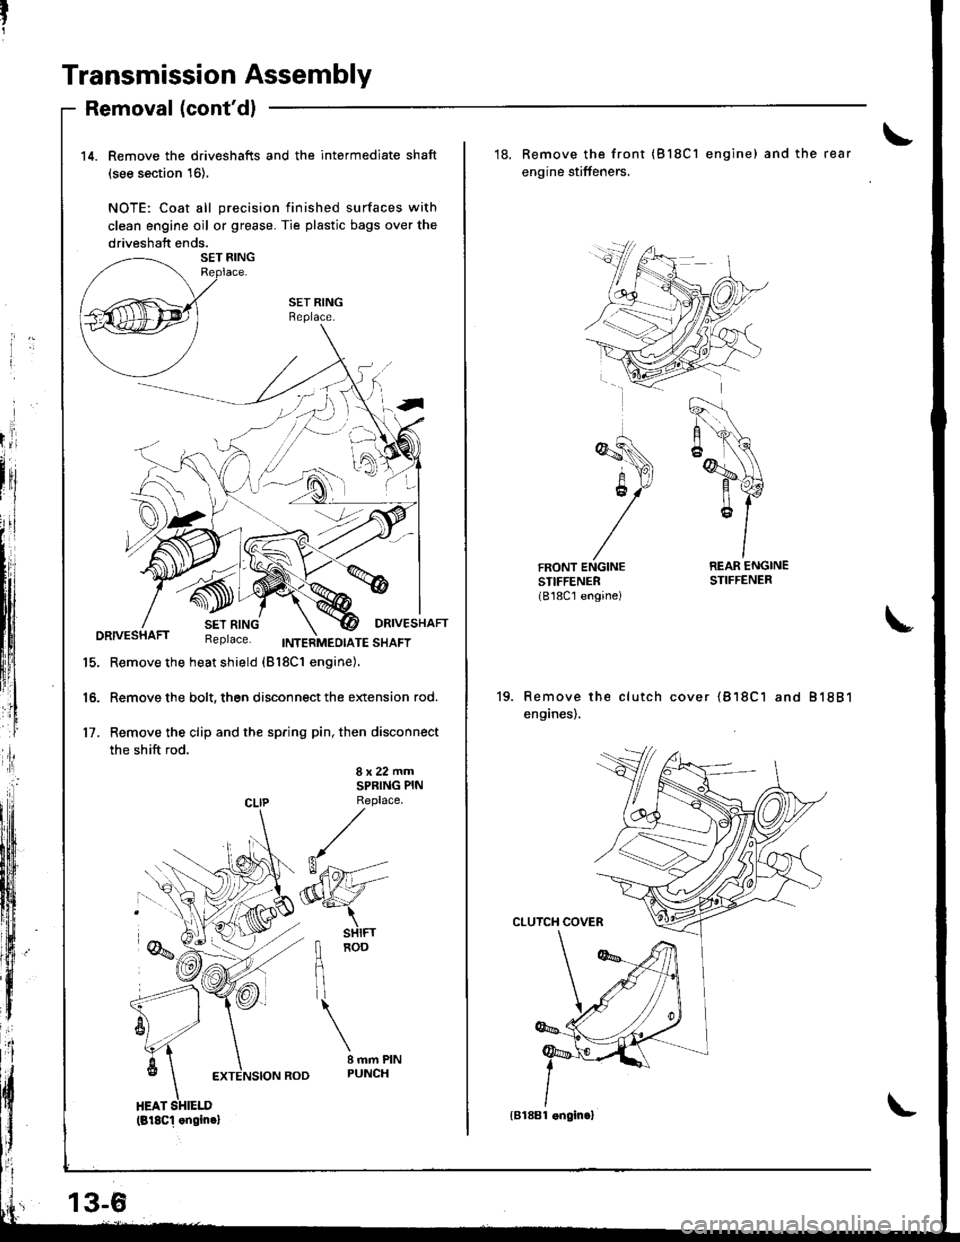 HONDA INTEGRA 1998 4.G Workshop Manual Transmission Assembly
Removal (contdl
14. Remove the driveshafts and the intermediate shaft
(see section 16).
NOTE: Coat all precision finished surfaces with
clean engine oil or grease. Tie plastic b